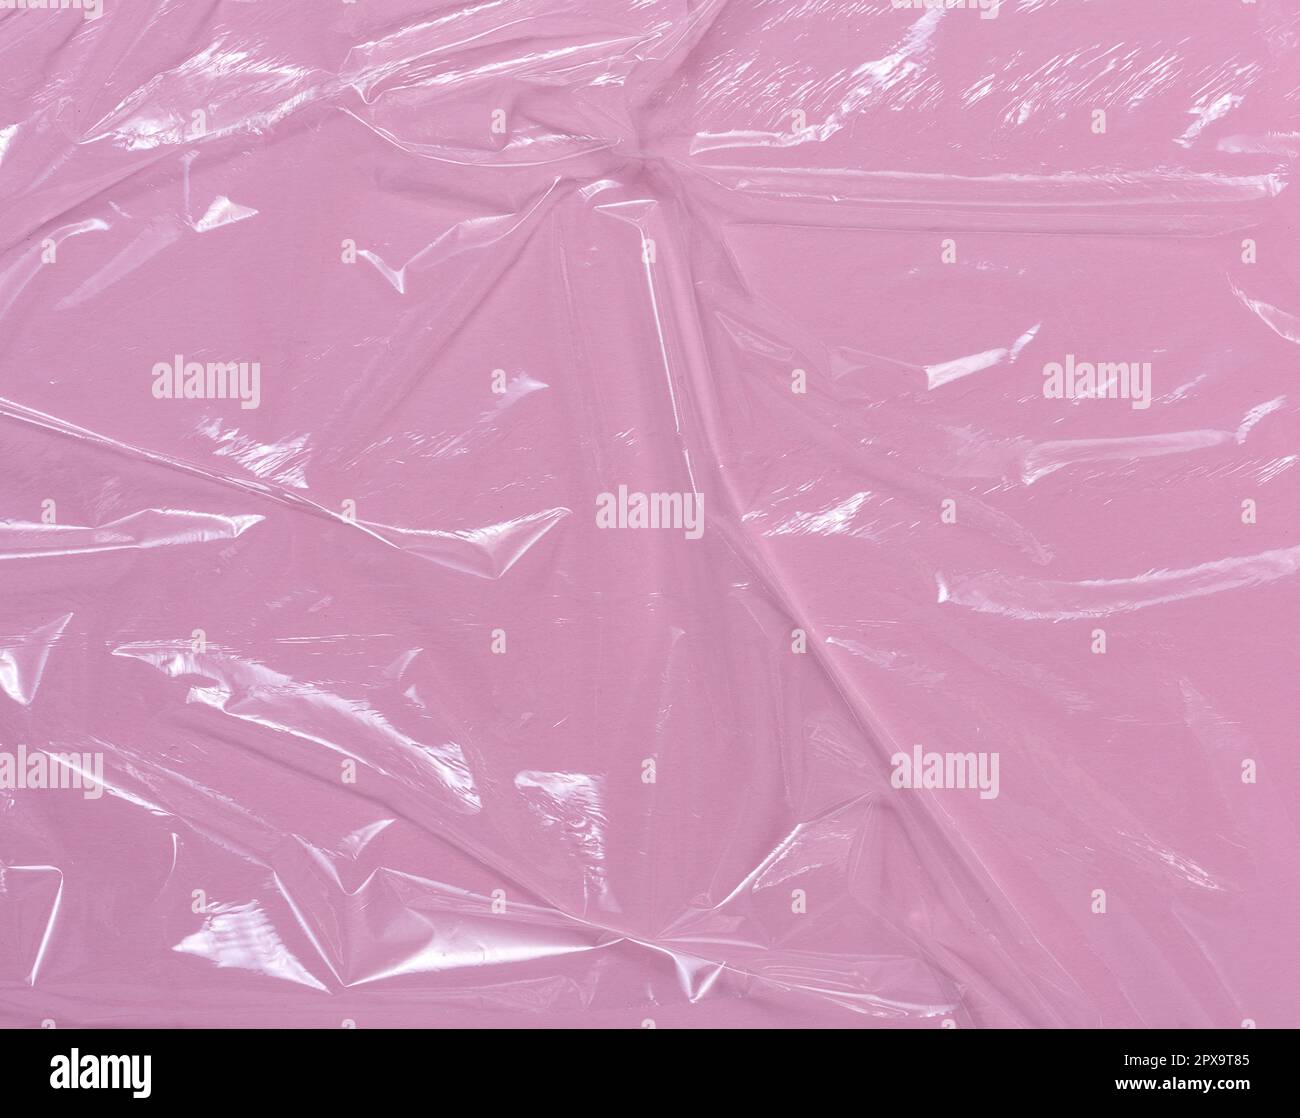 Texture of crumpled transparent polyethylene on a pink background, full frame. Stock Photo